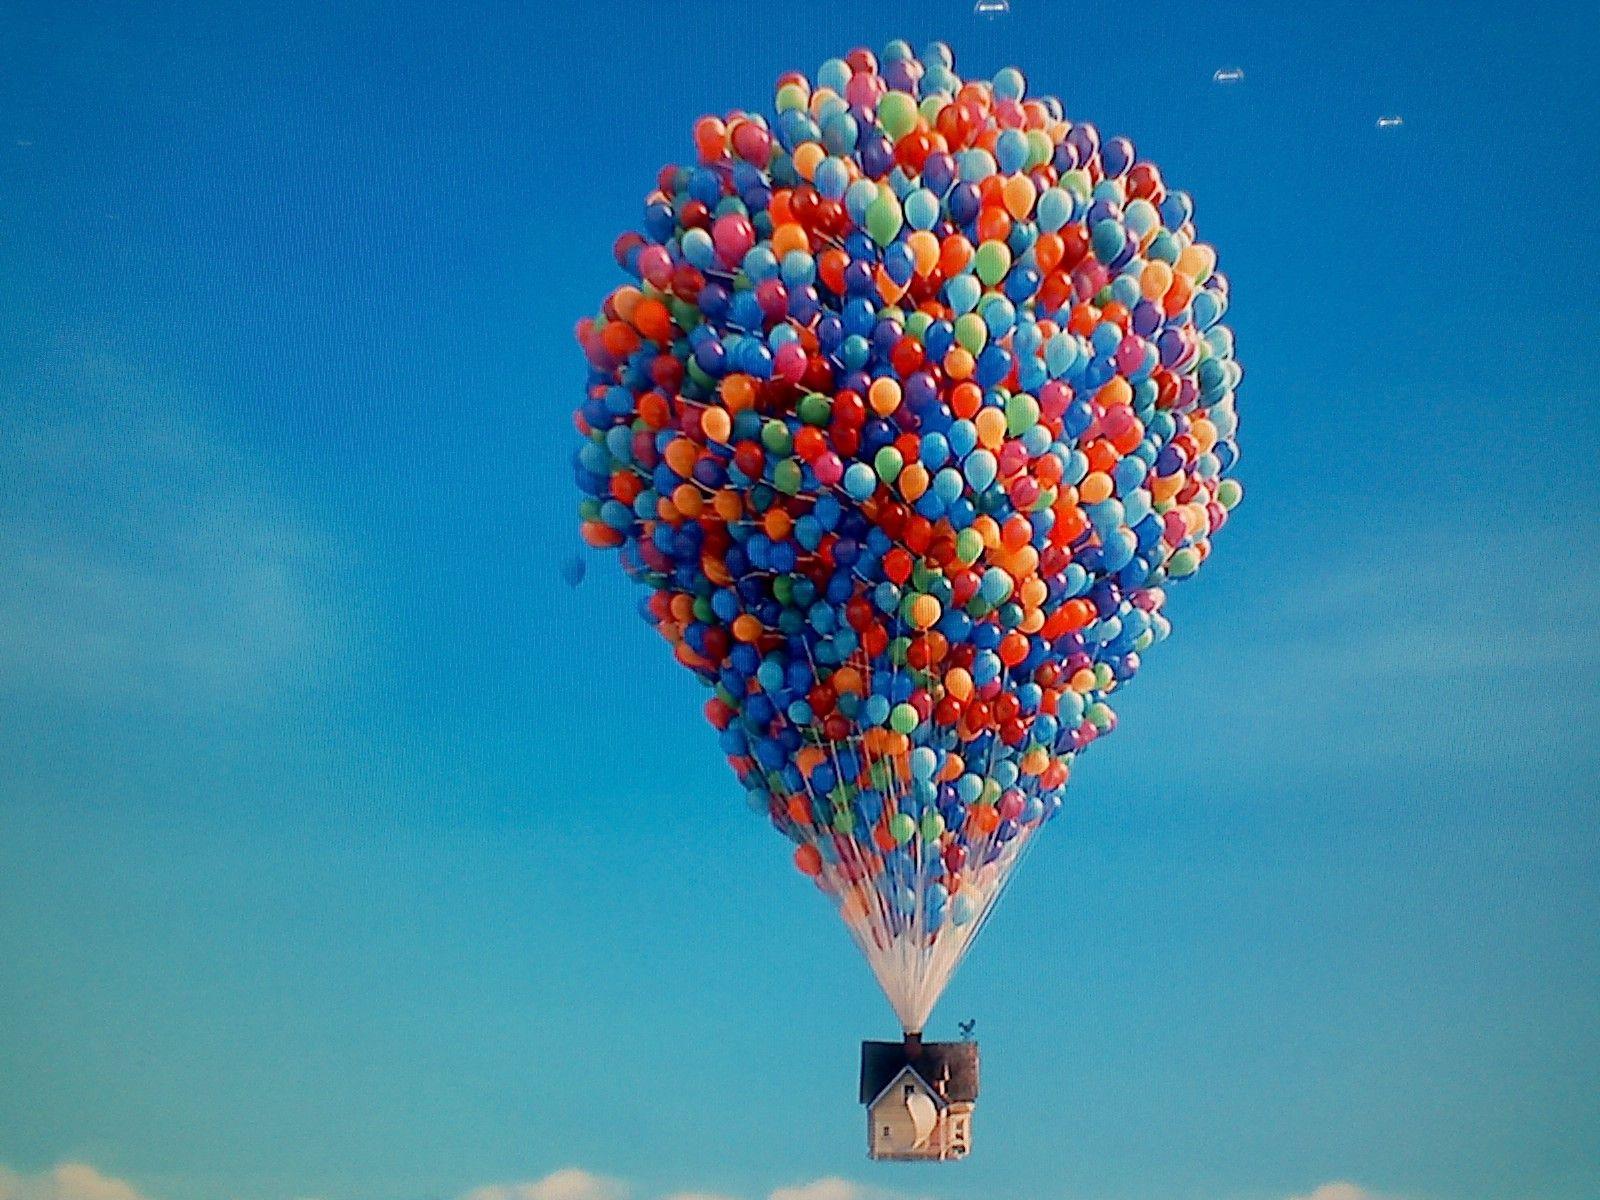 Balloons Photos Download The BEST Free Balloons Stock Photos  HD Images